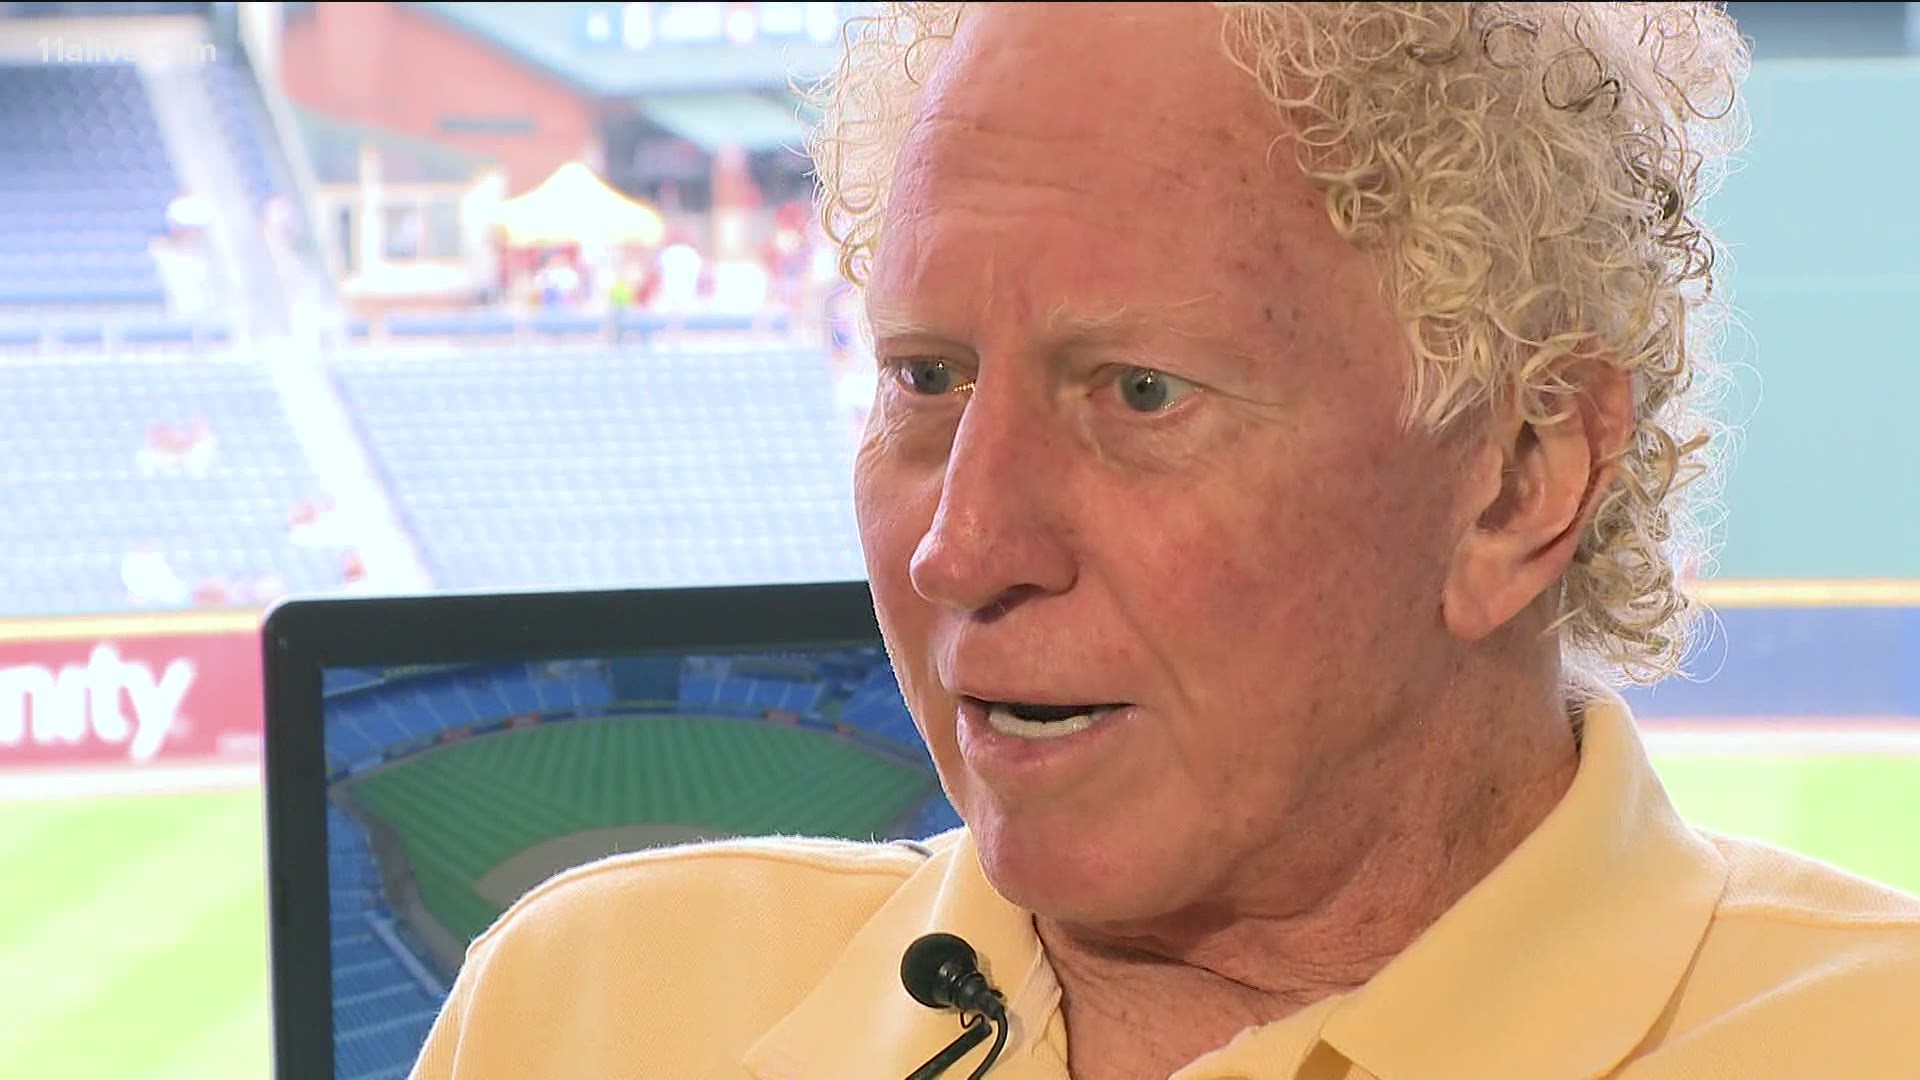 Legendary Braves announcer and Hall-of-Famer pitcher Don Sutton has died, the team and his son announced. He was 75 years old.